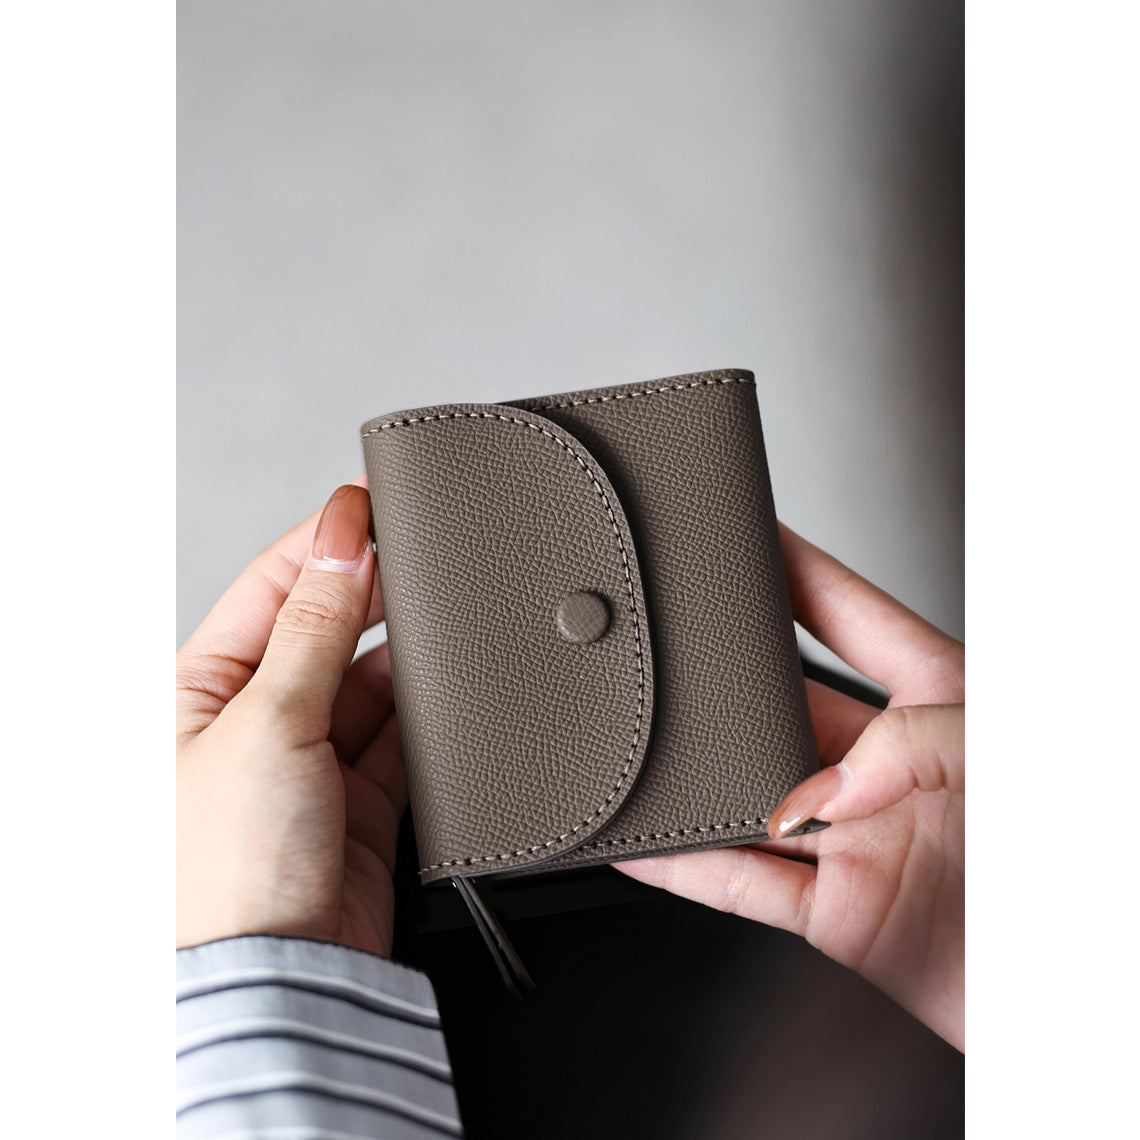 POPSEWING® Top Grain Leather Compact Coin Purse DIY Kits